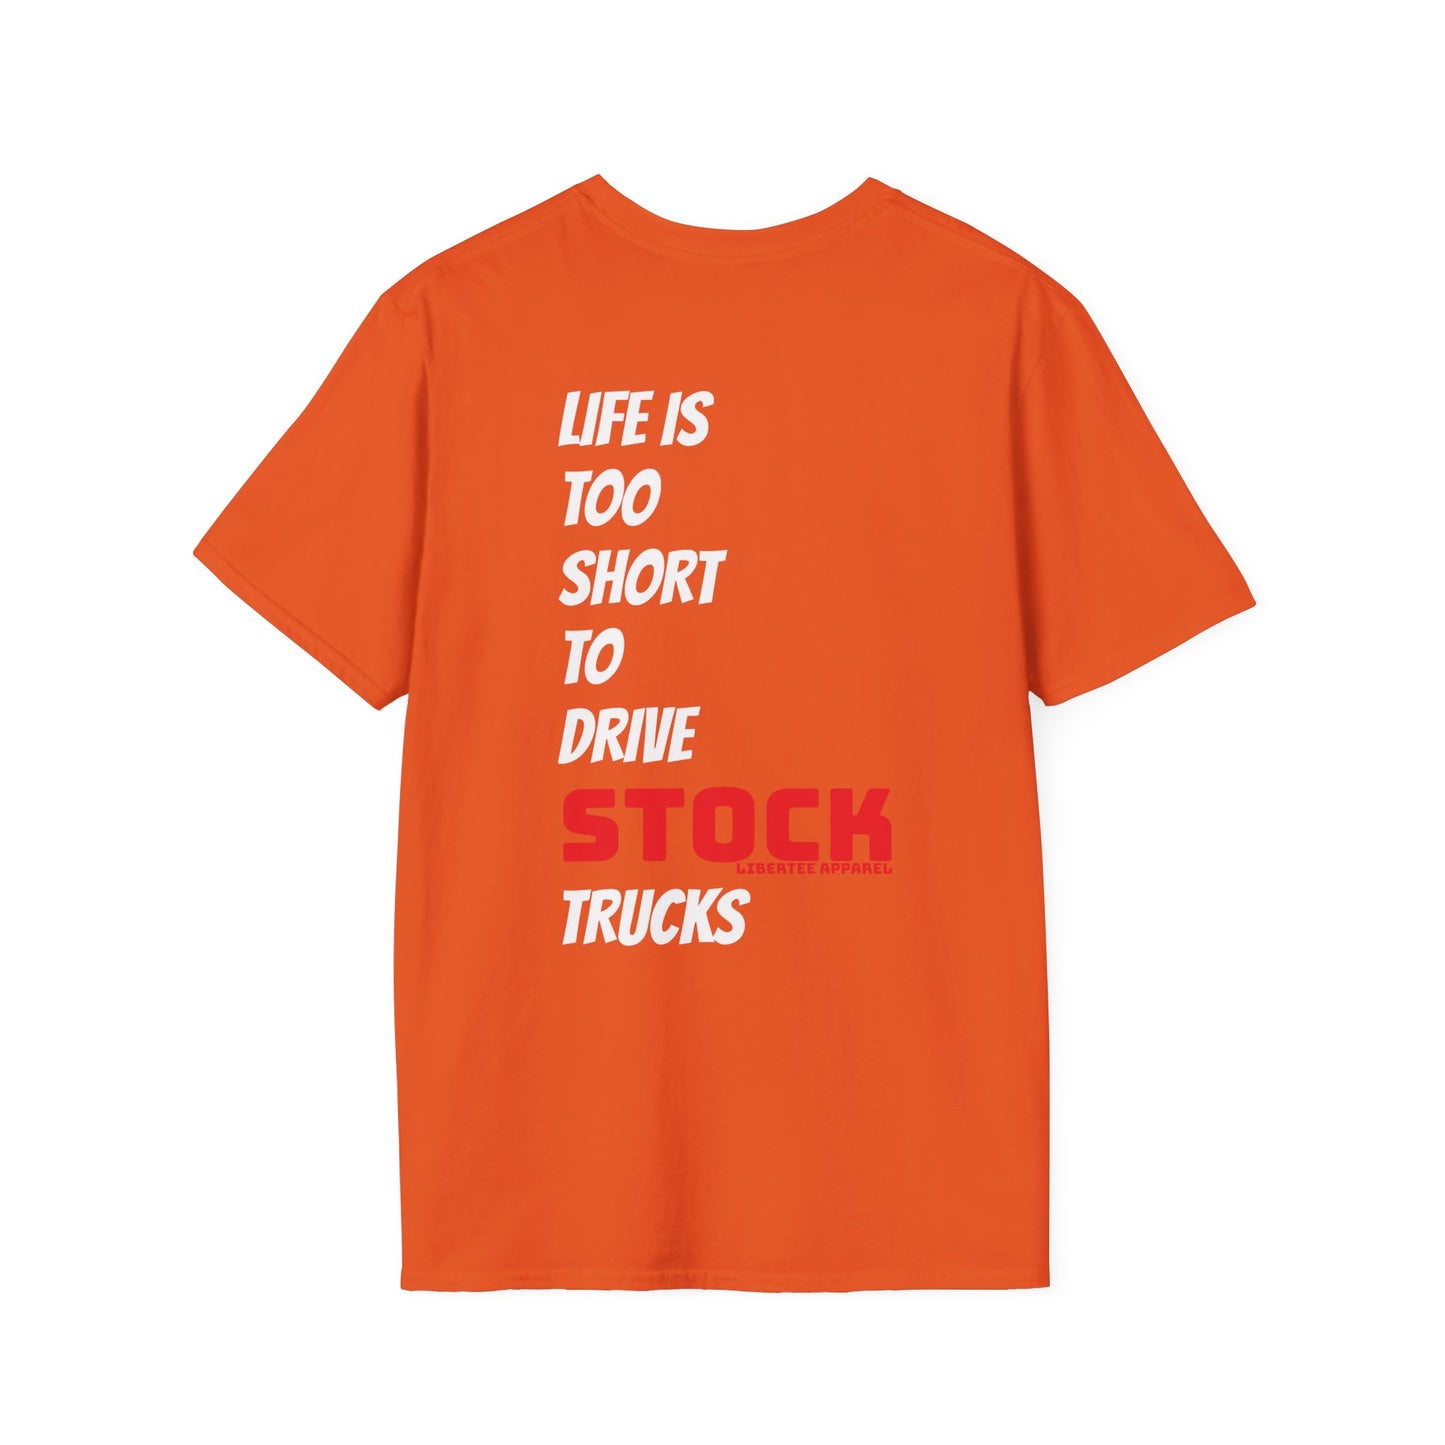 "LIFE IS TOO SHORT TO DRIVE STOCK TRUCKS